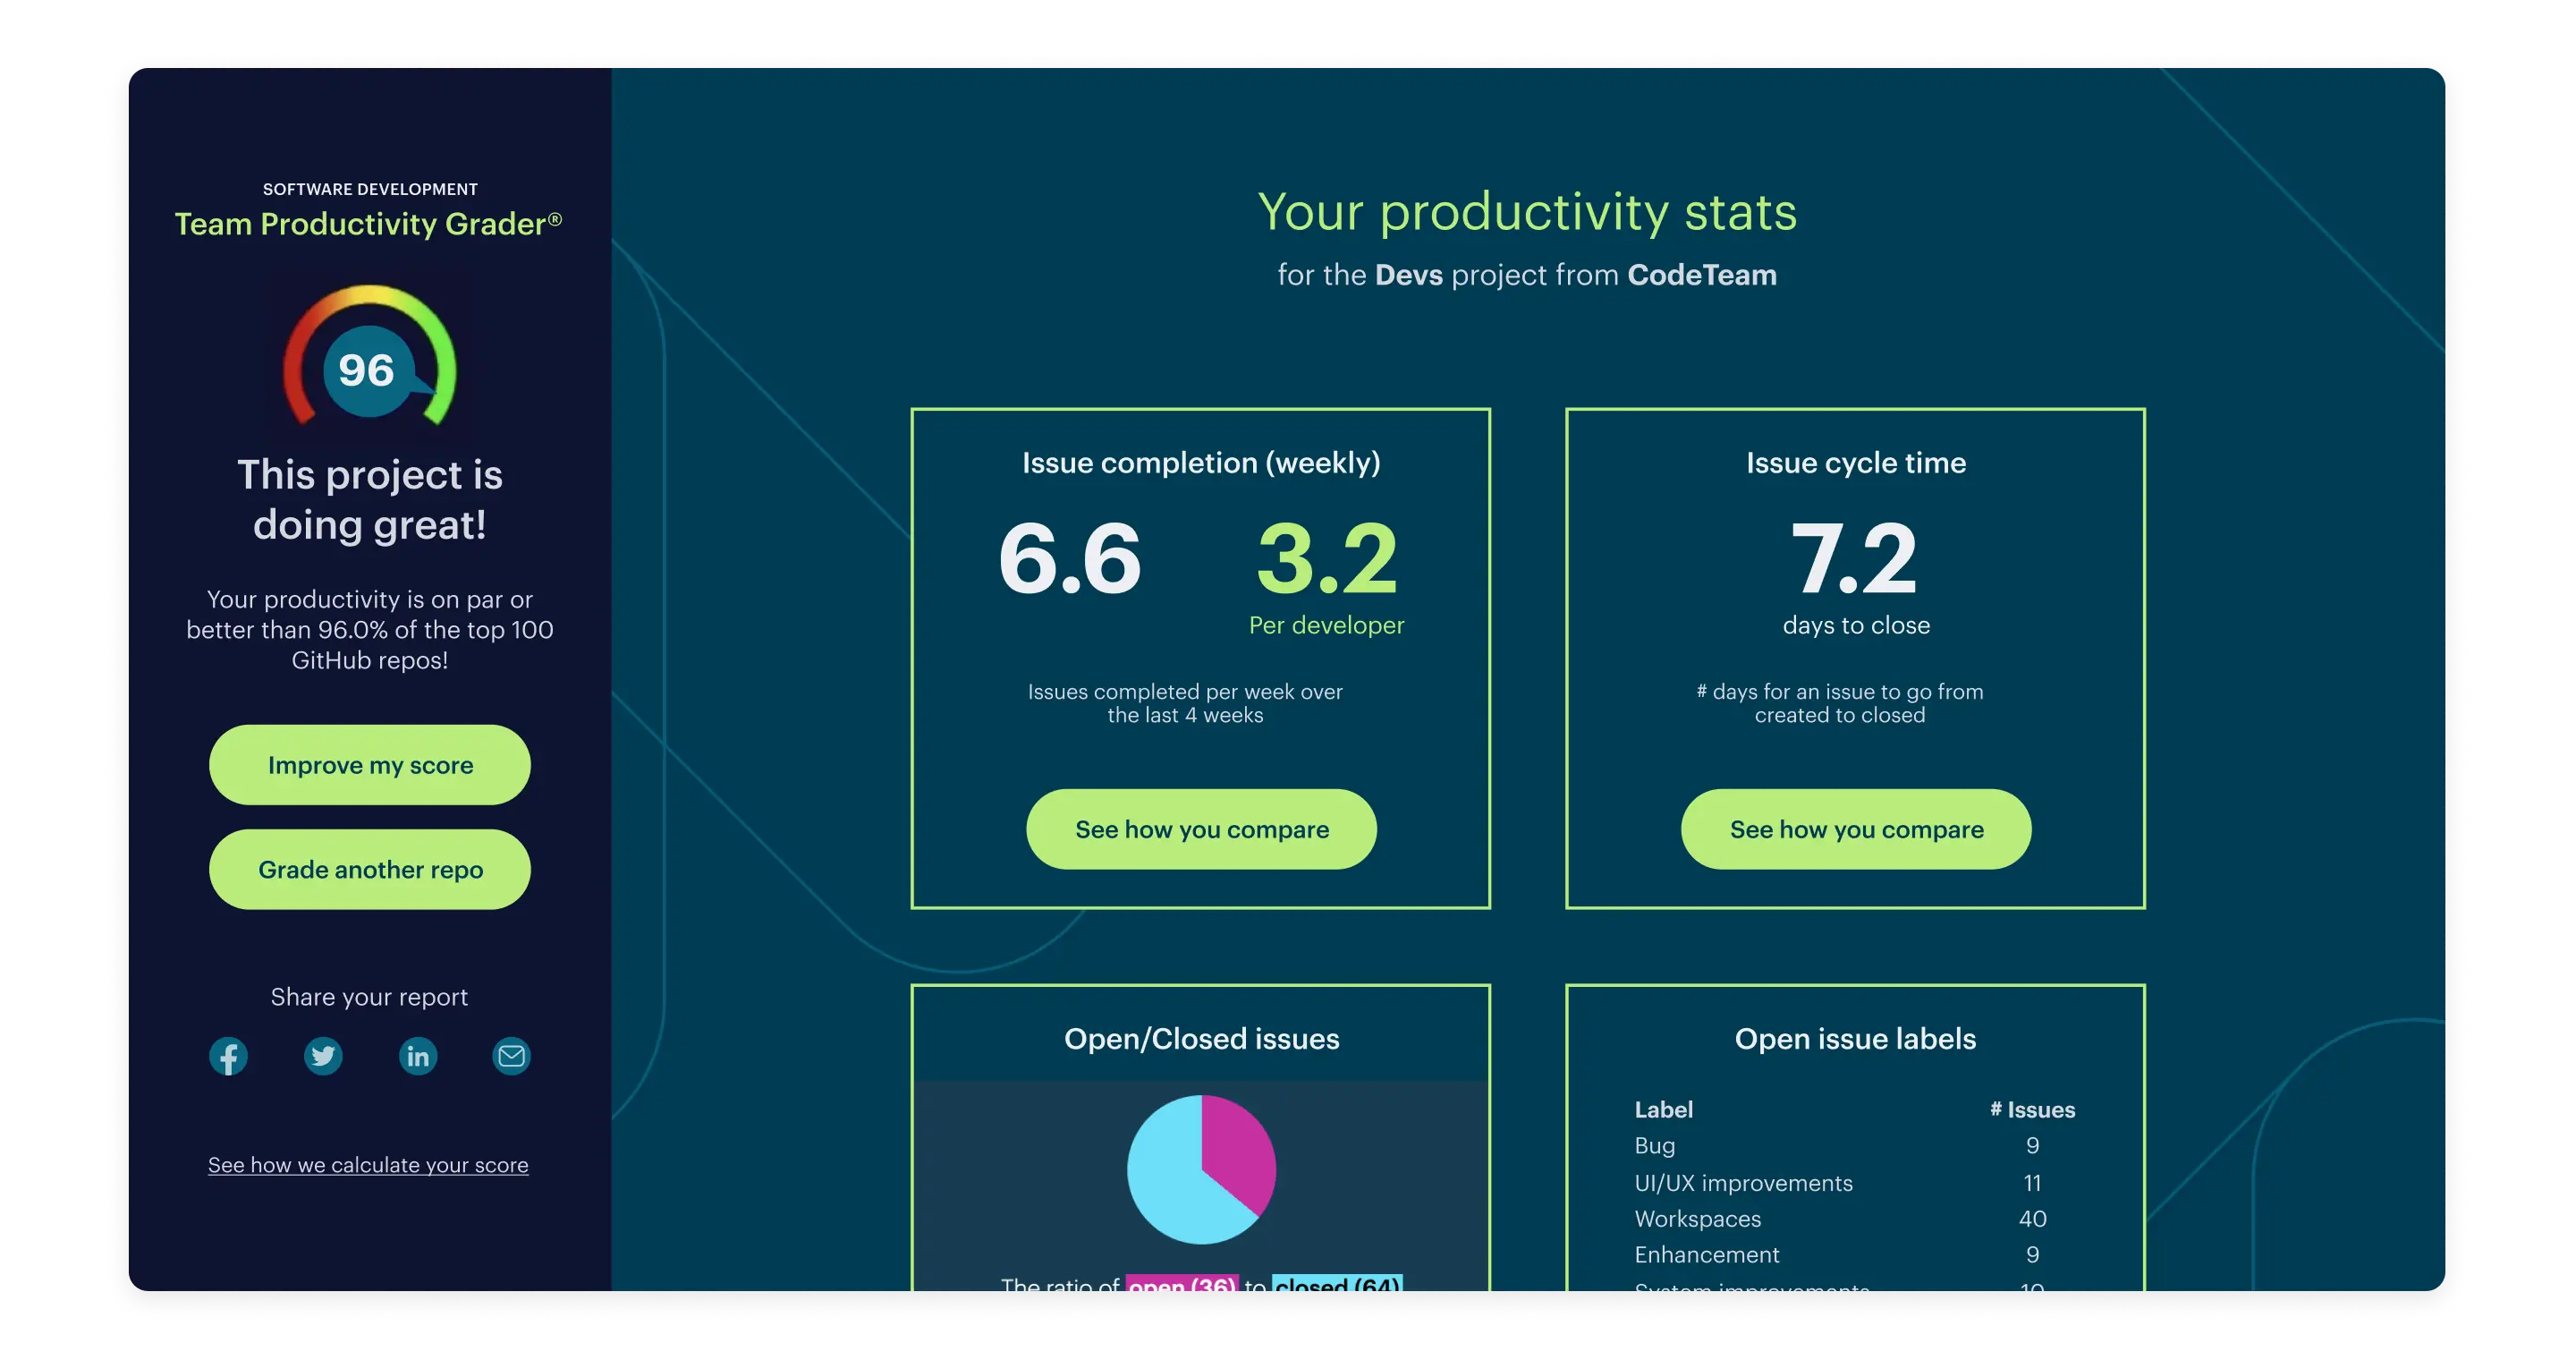 Tools for measuring developer productivity